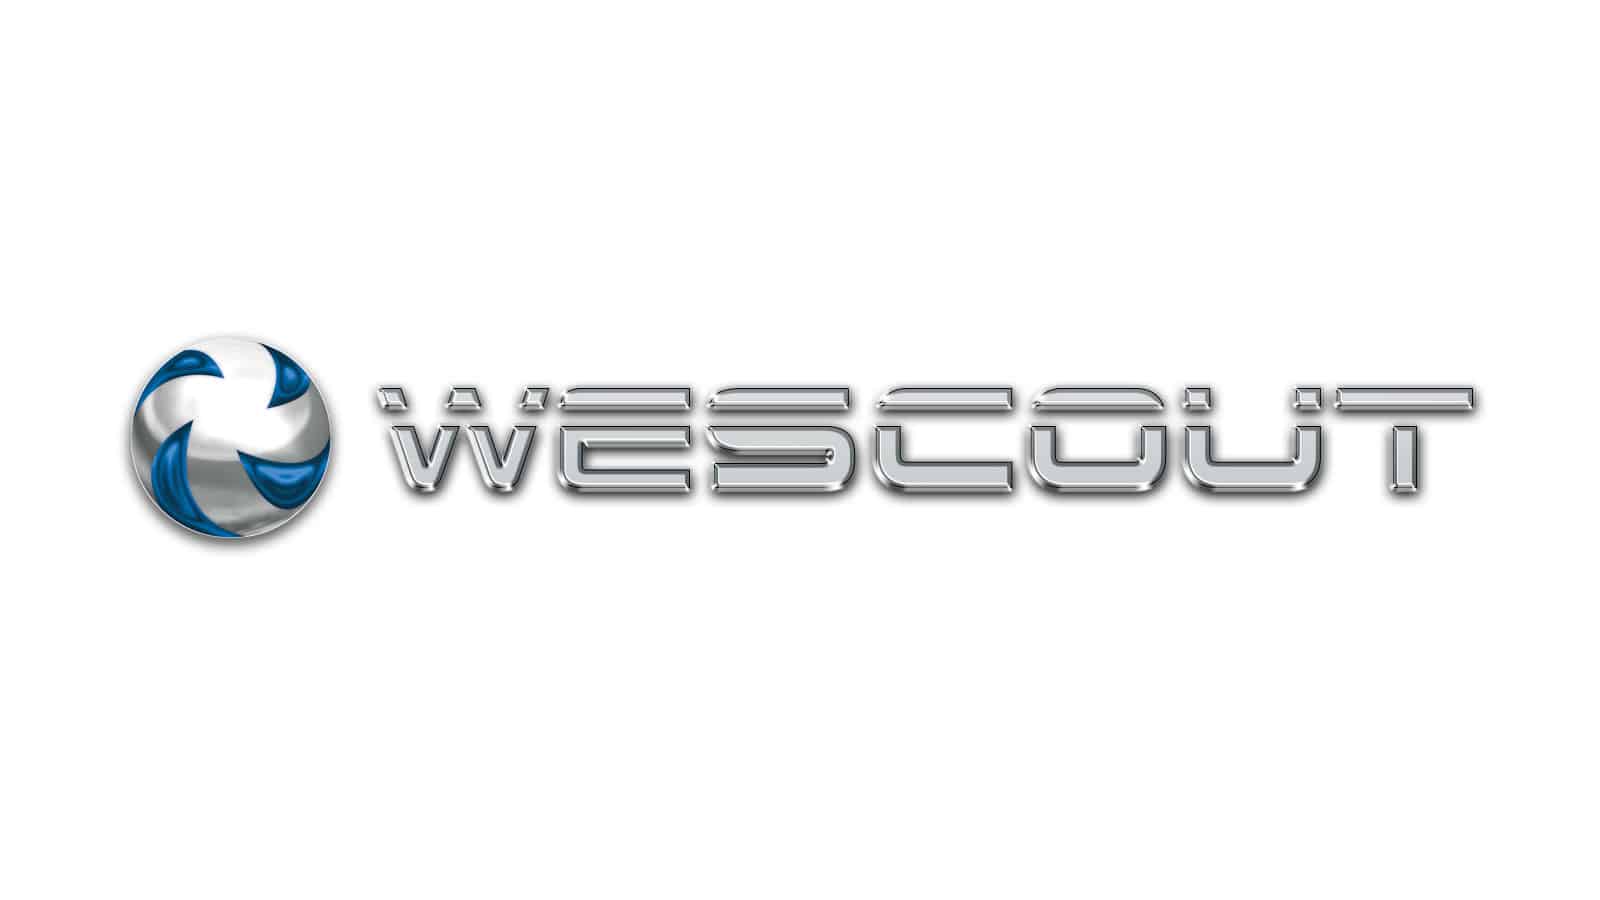 WeScout